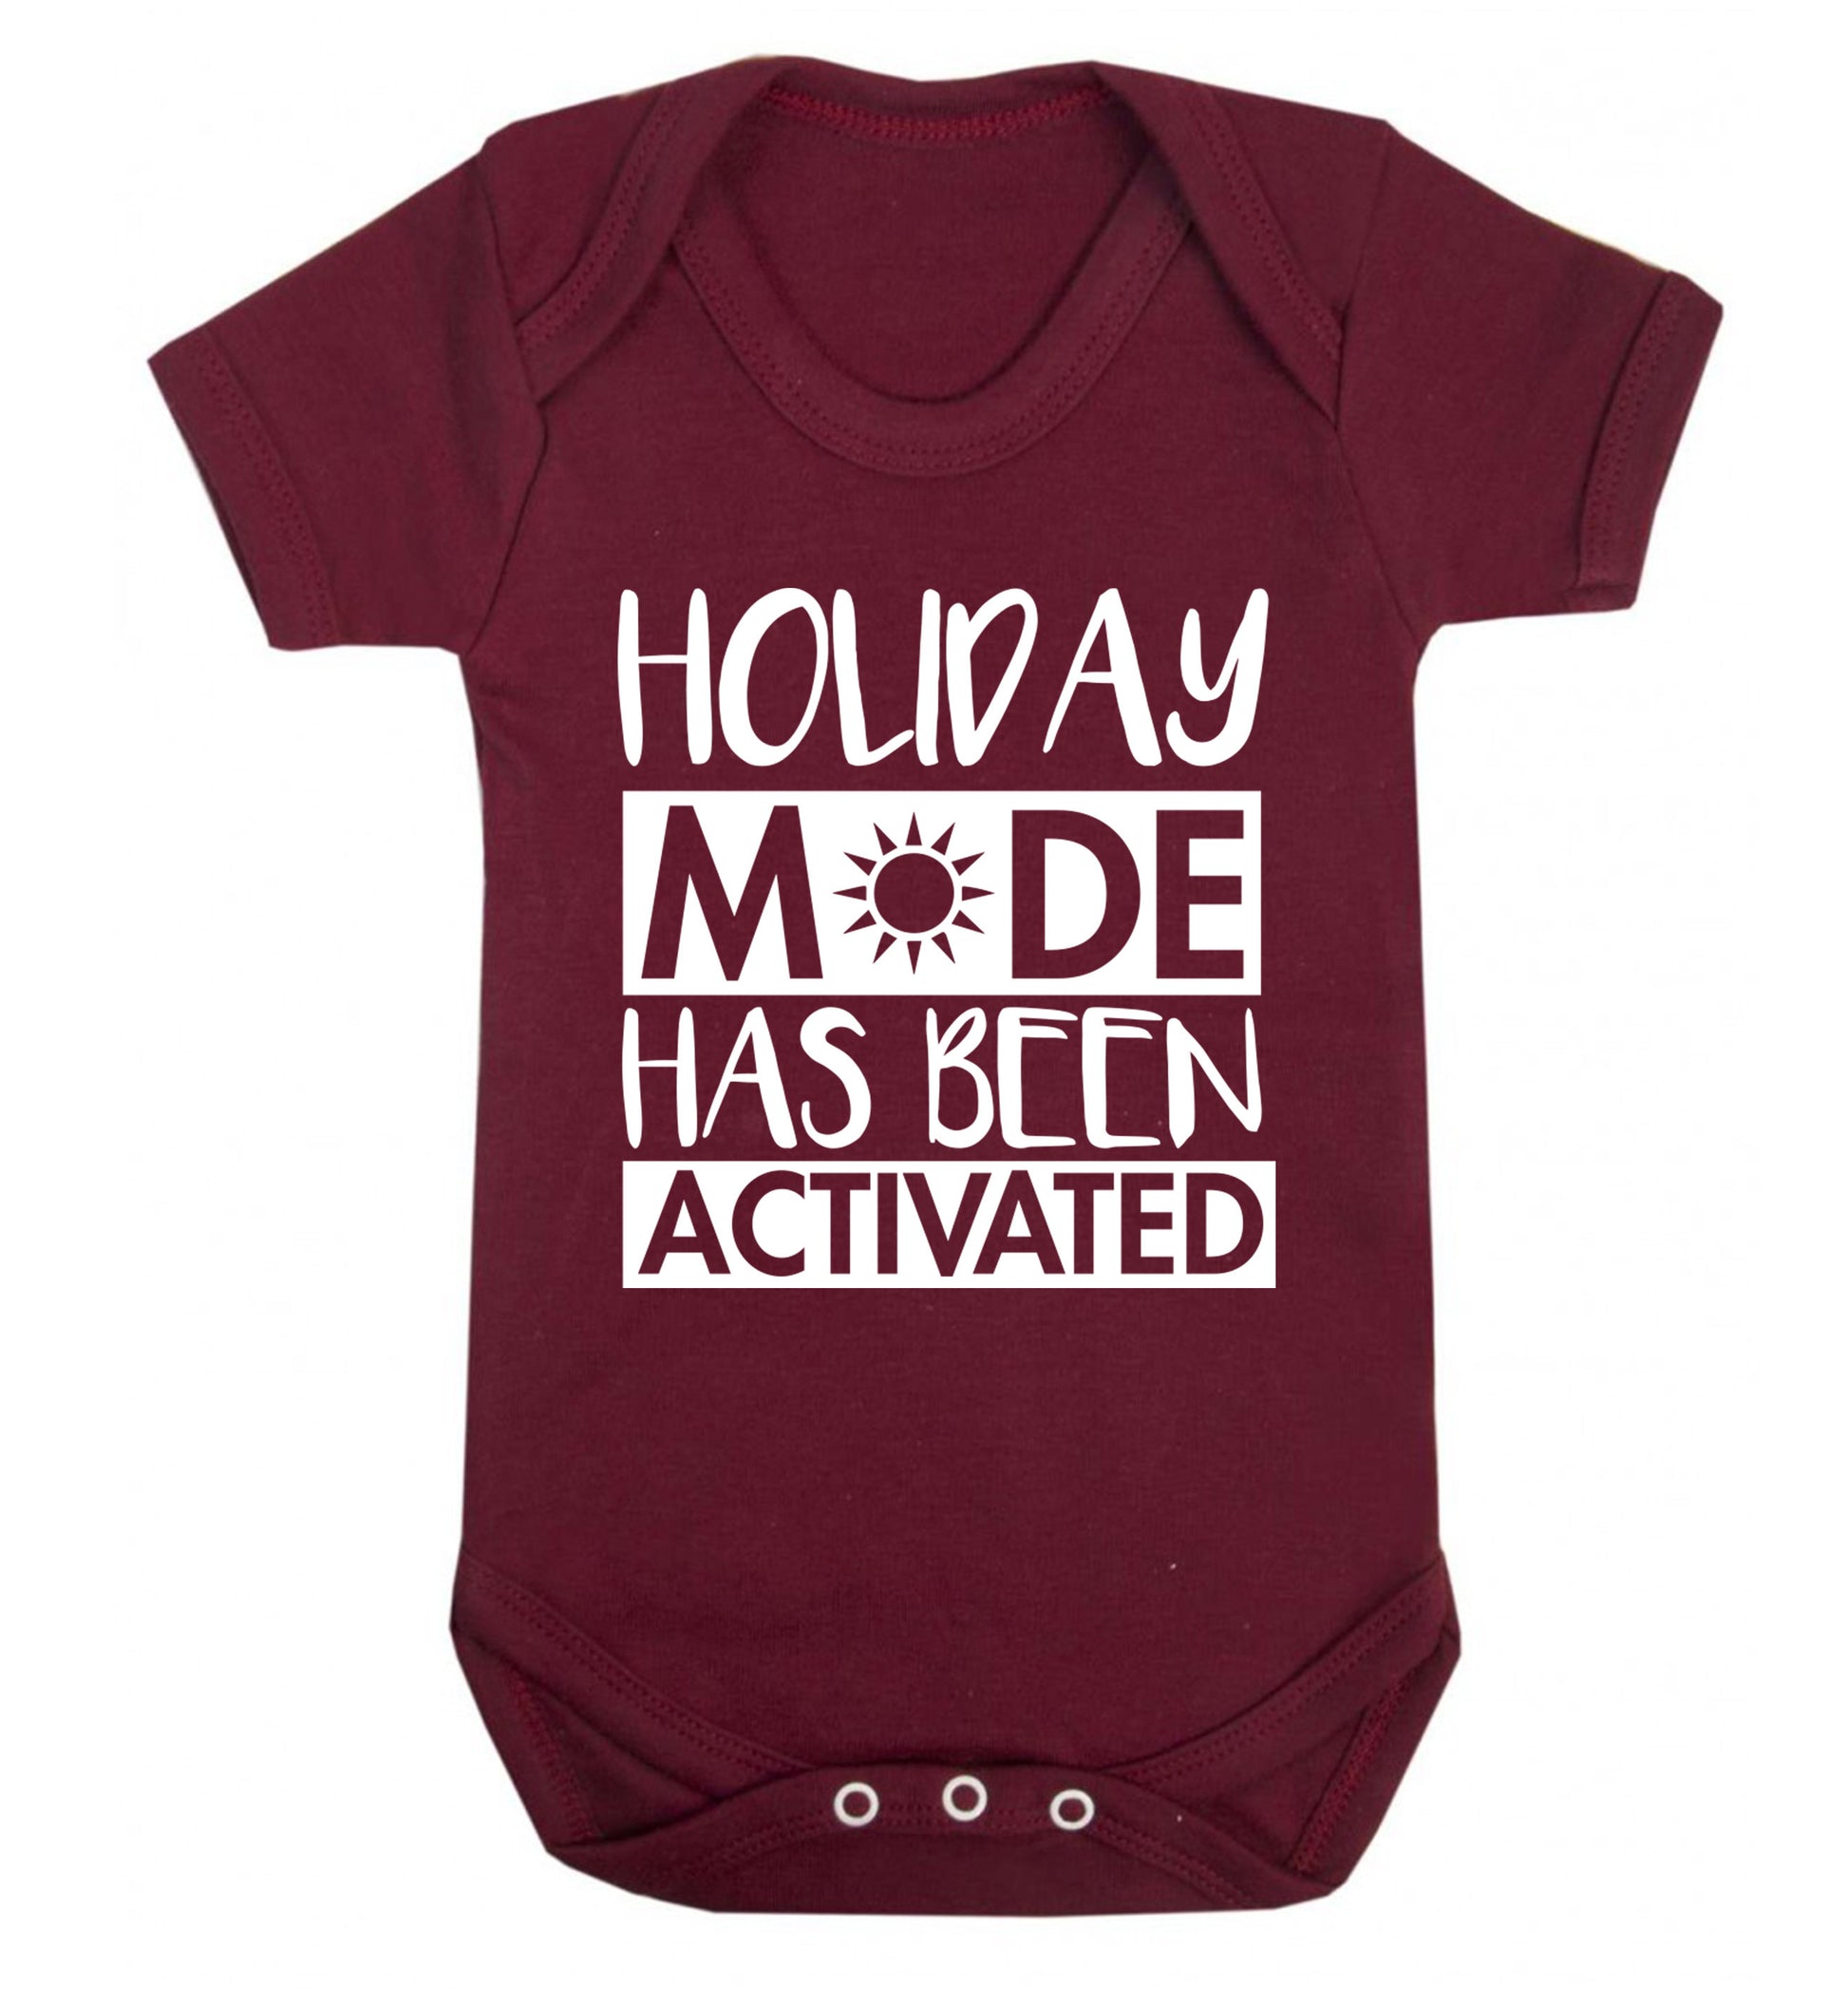 Holiday mode has been activated Baby Vest maroon 18-24 months